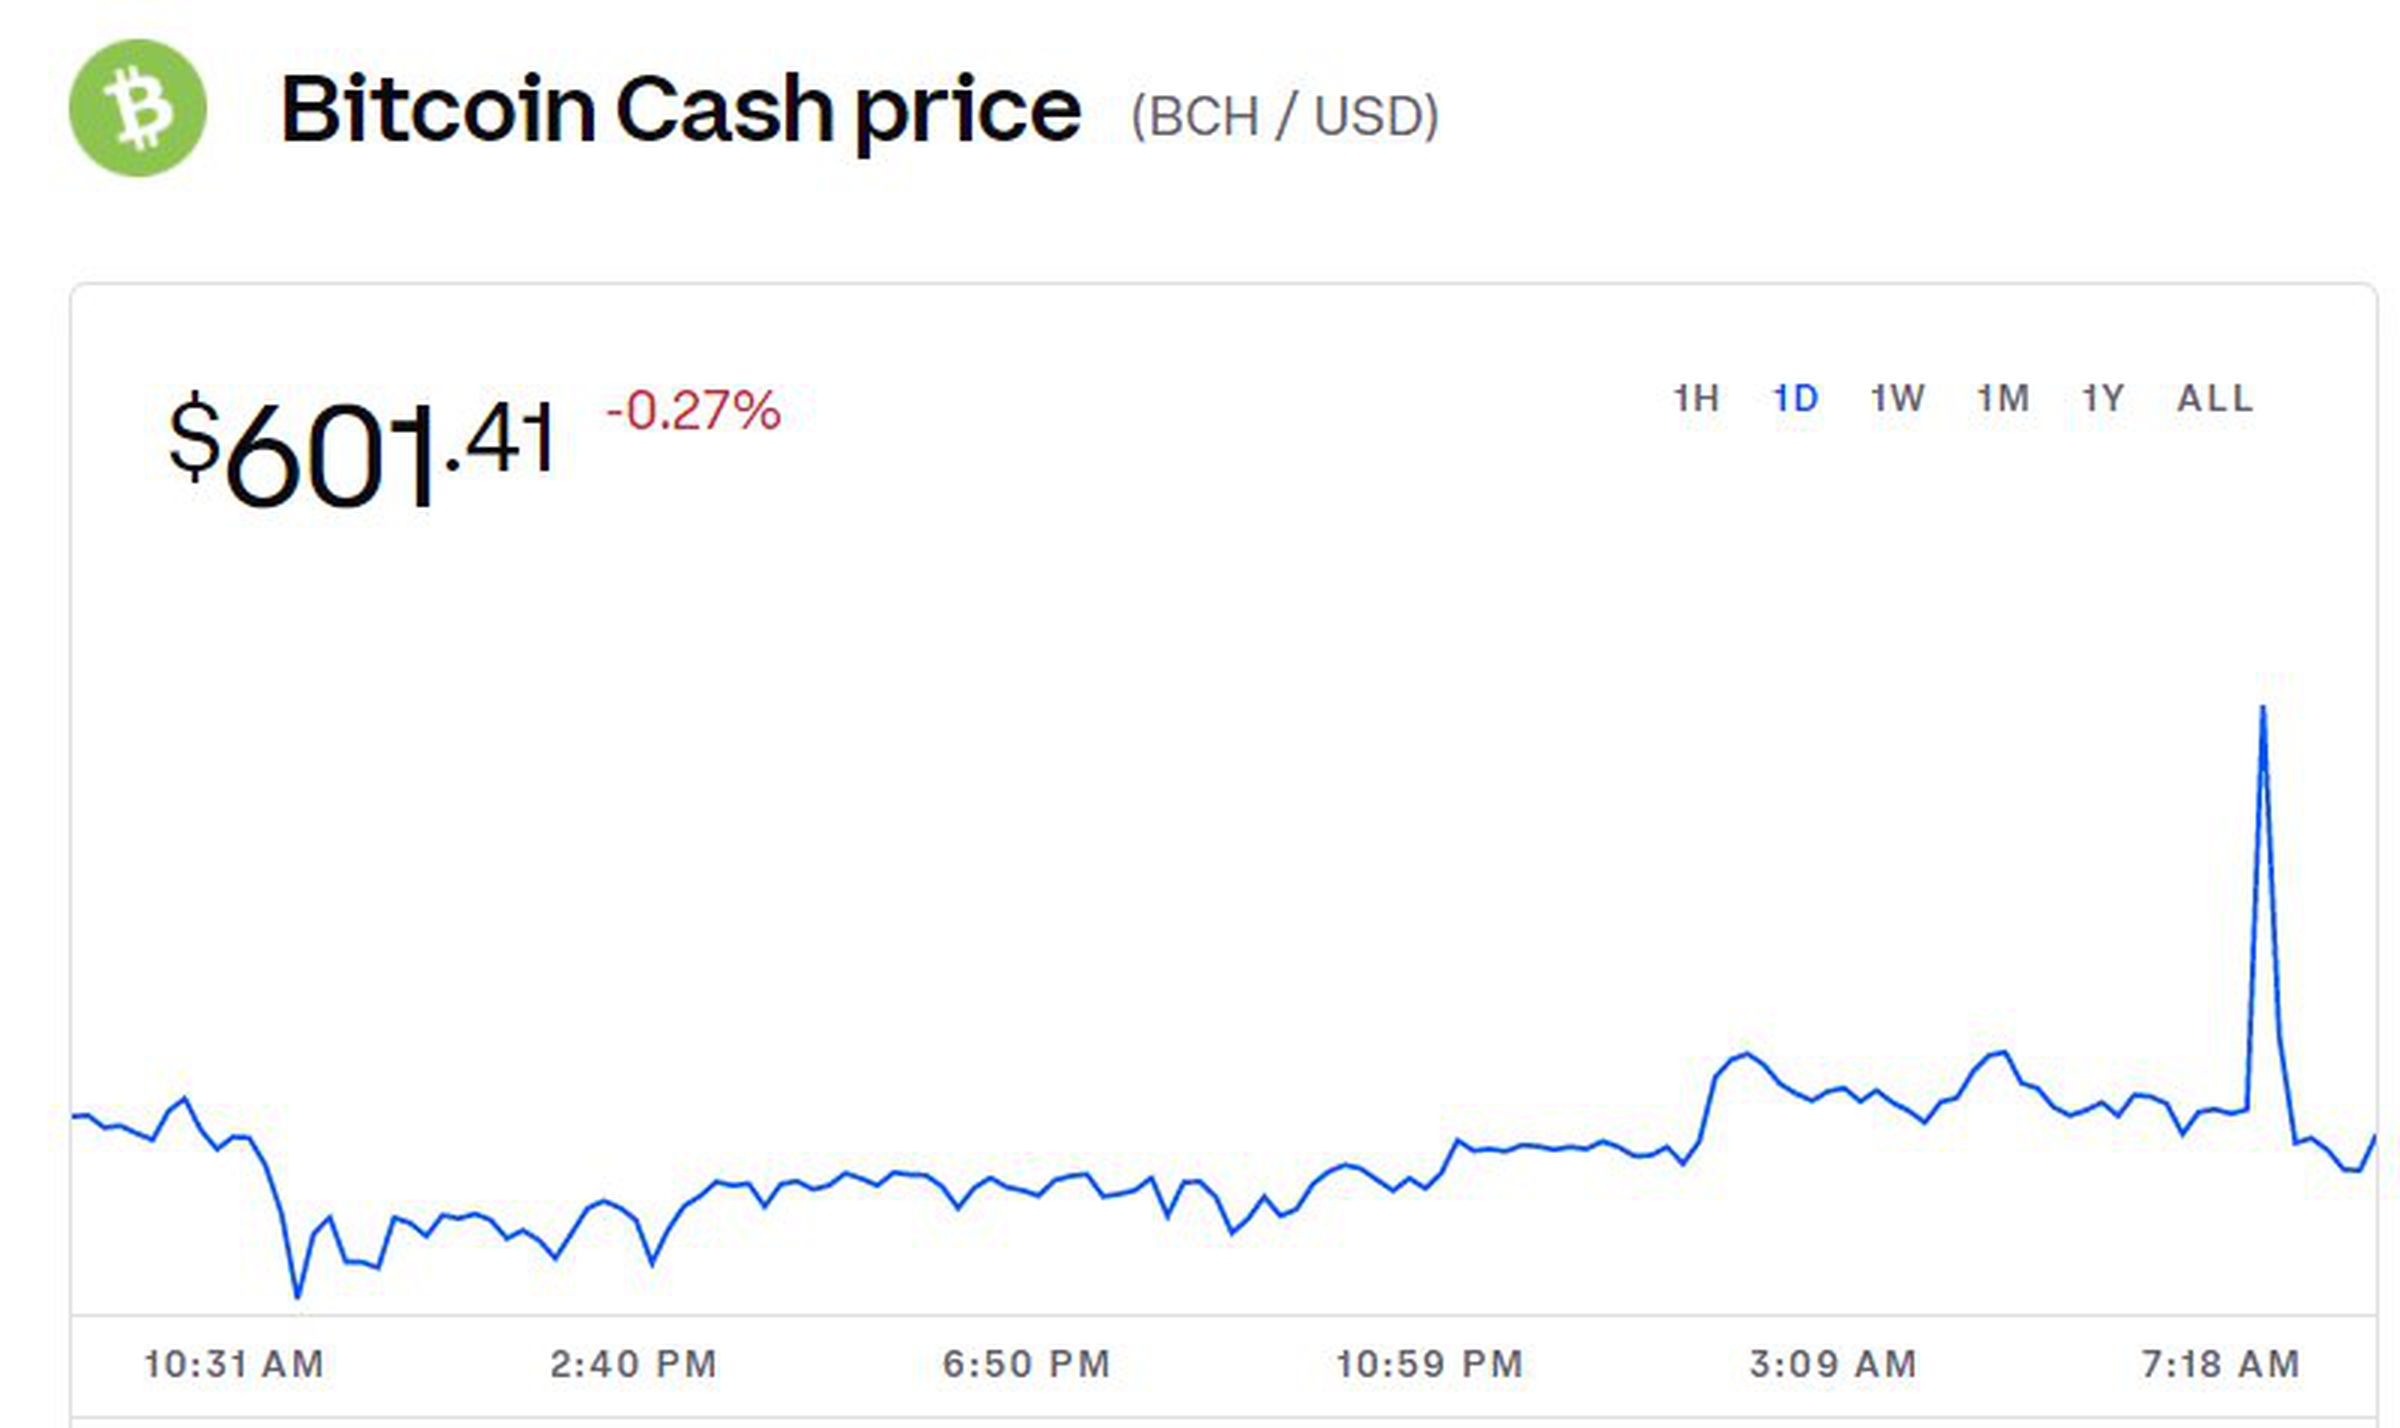 The price of Bitcoin Cash spiked briefly due to the hoax